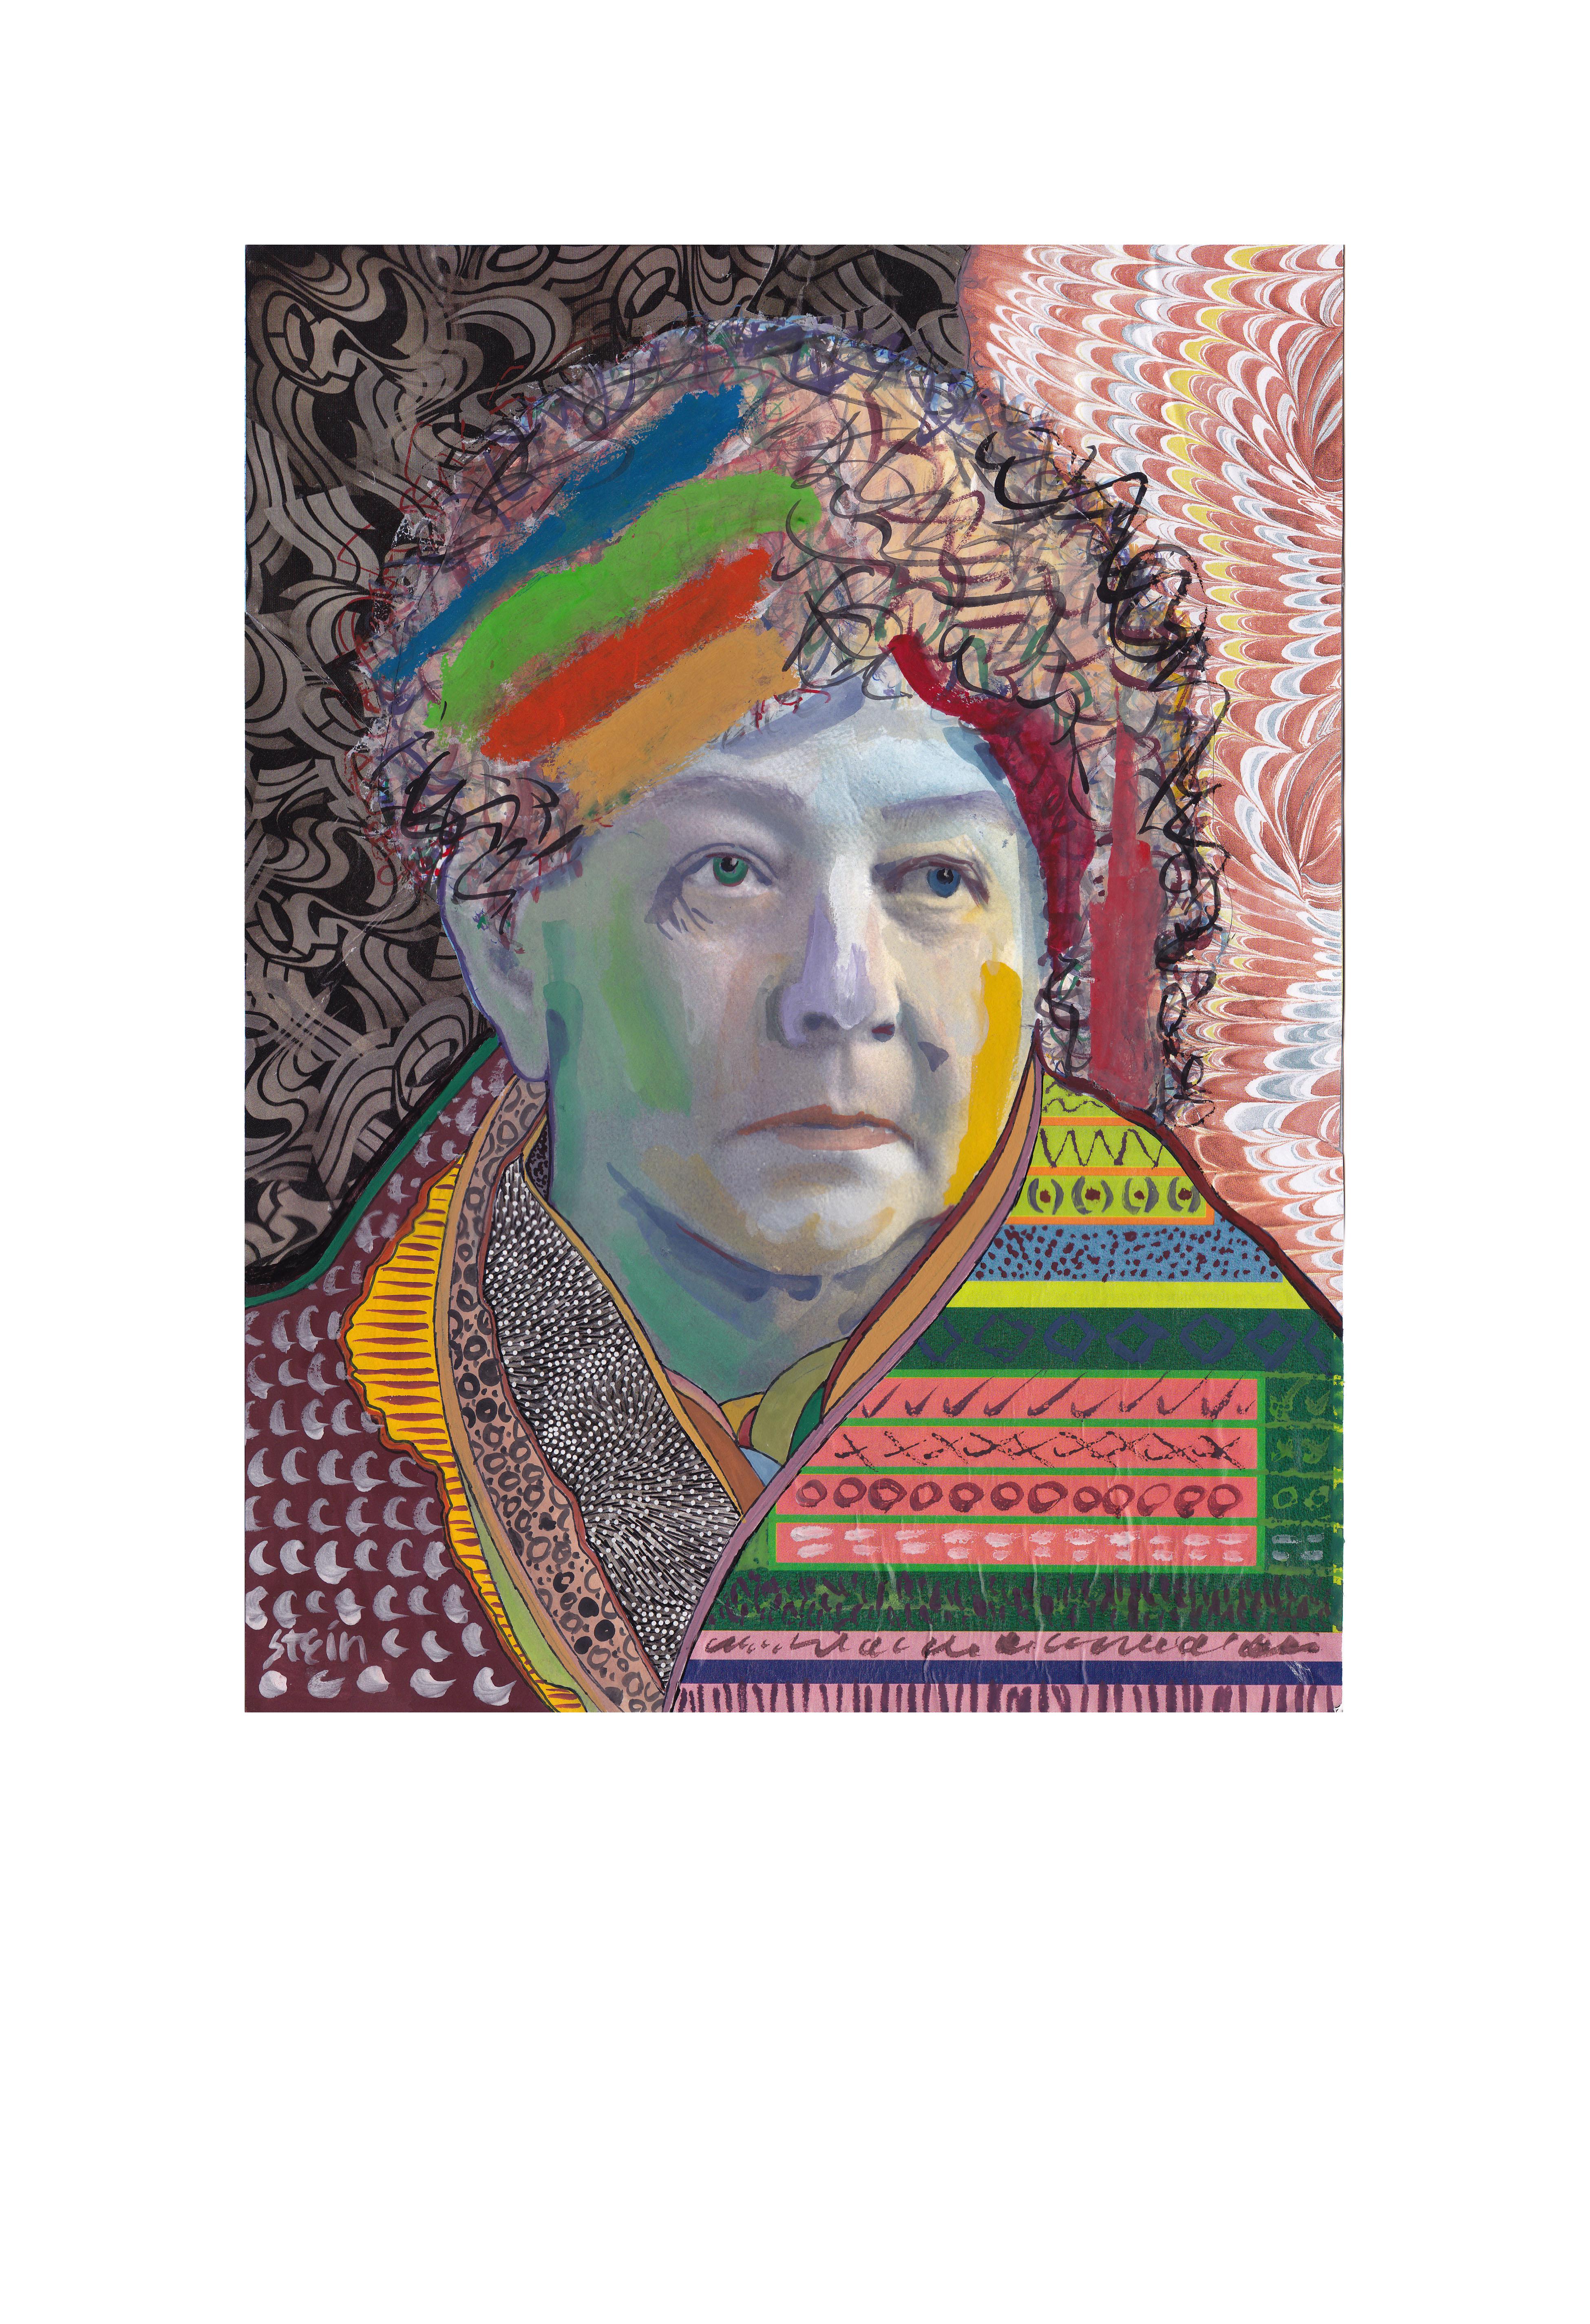 Signed Limited Edition Feminist Contemporary Print - Elizabeth Cady Stanton 800 